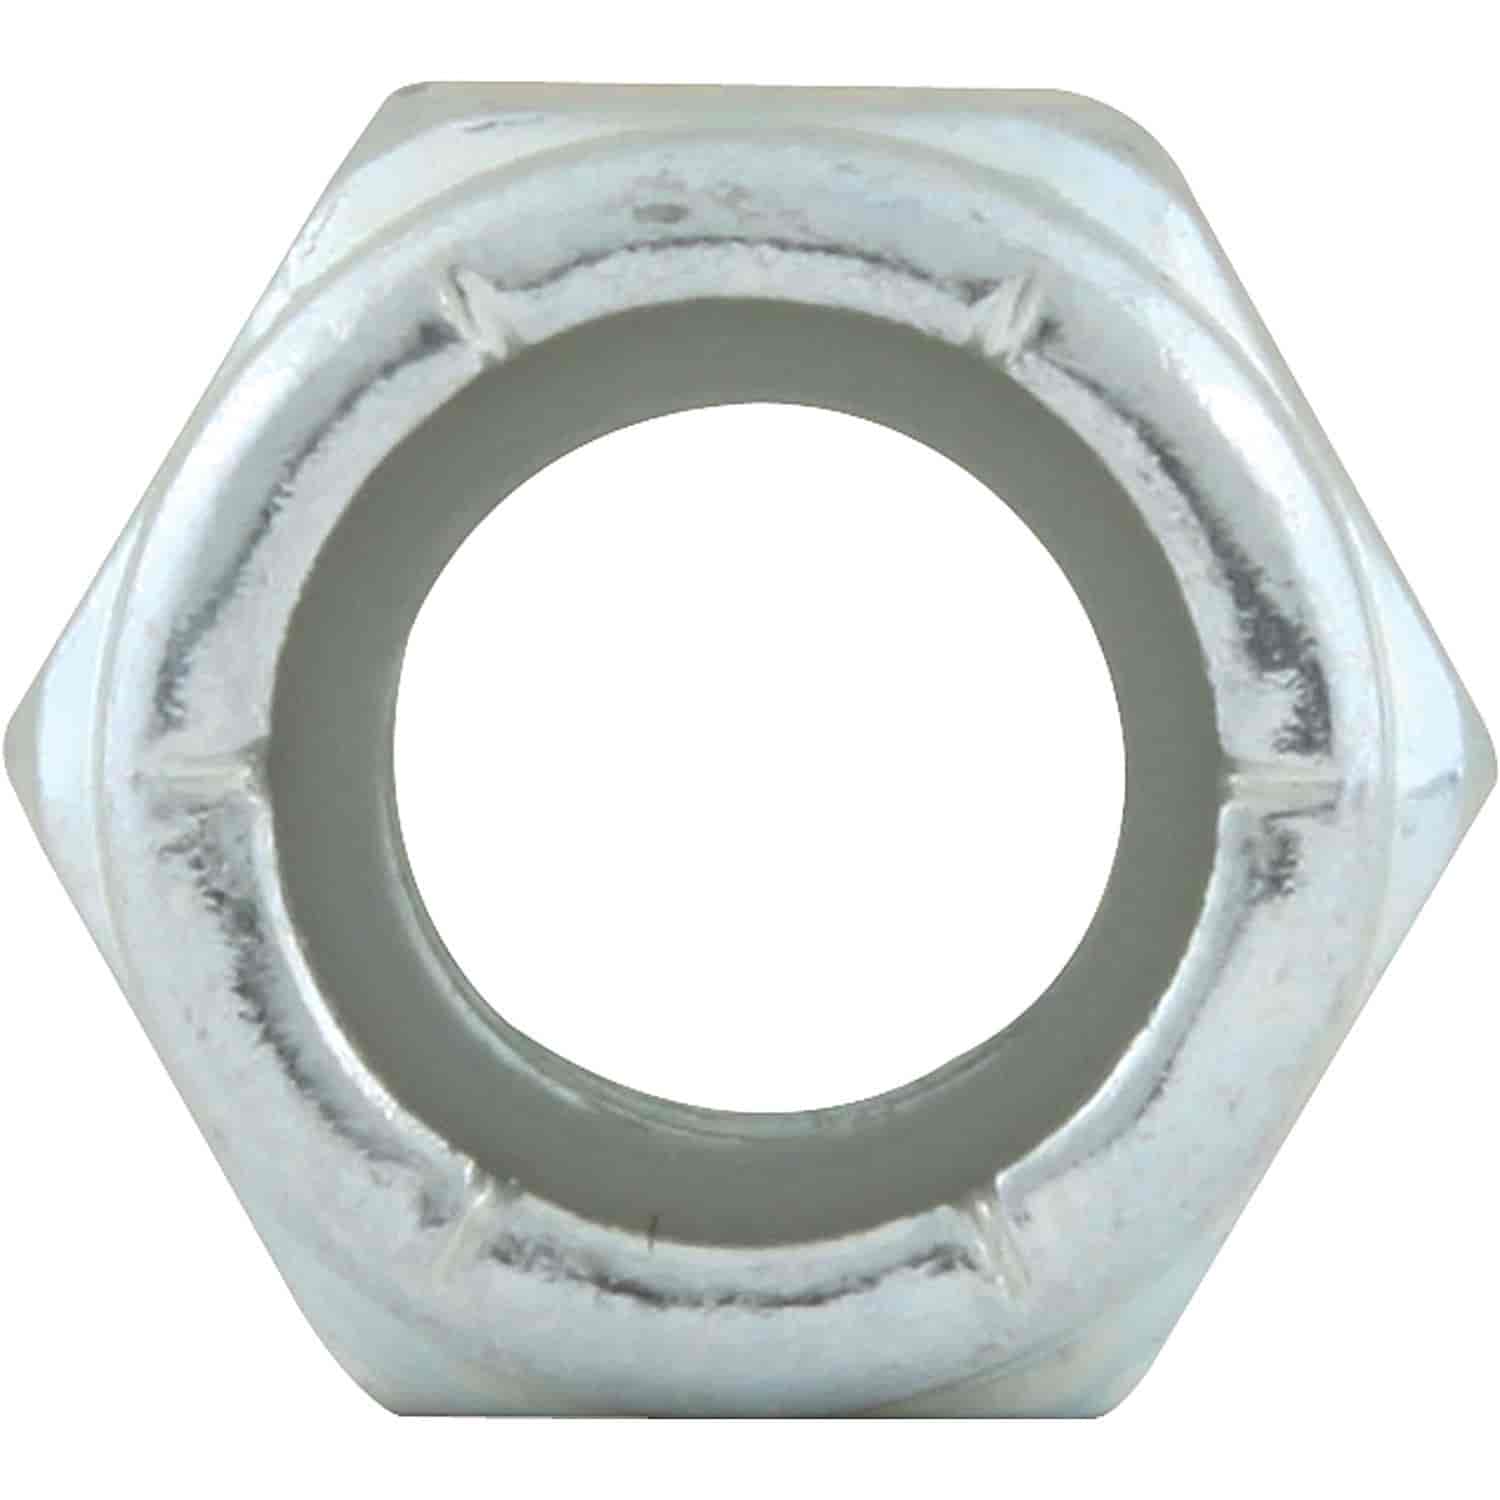 Coarse Thread Hex Nuts With Nylon Inserts 3/8